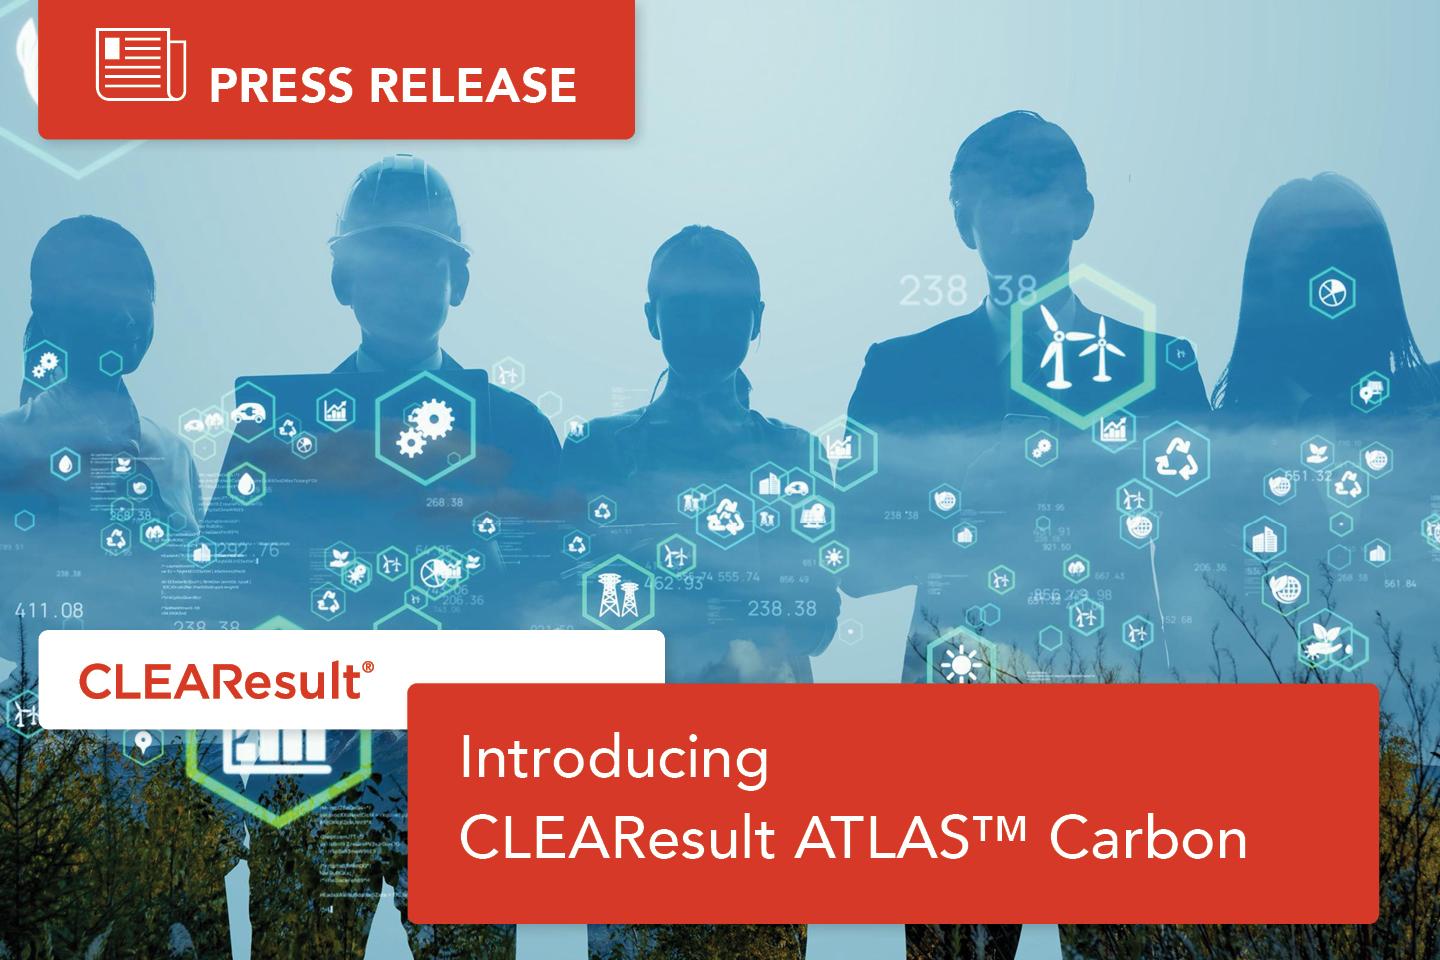 New CLEAResult ATLASTM Carbon Helps Businesses Measure and Report Their Greenhouse Gas Emissions